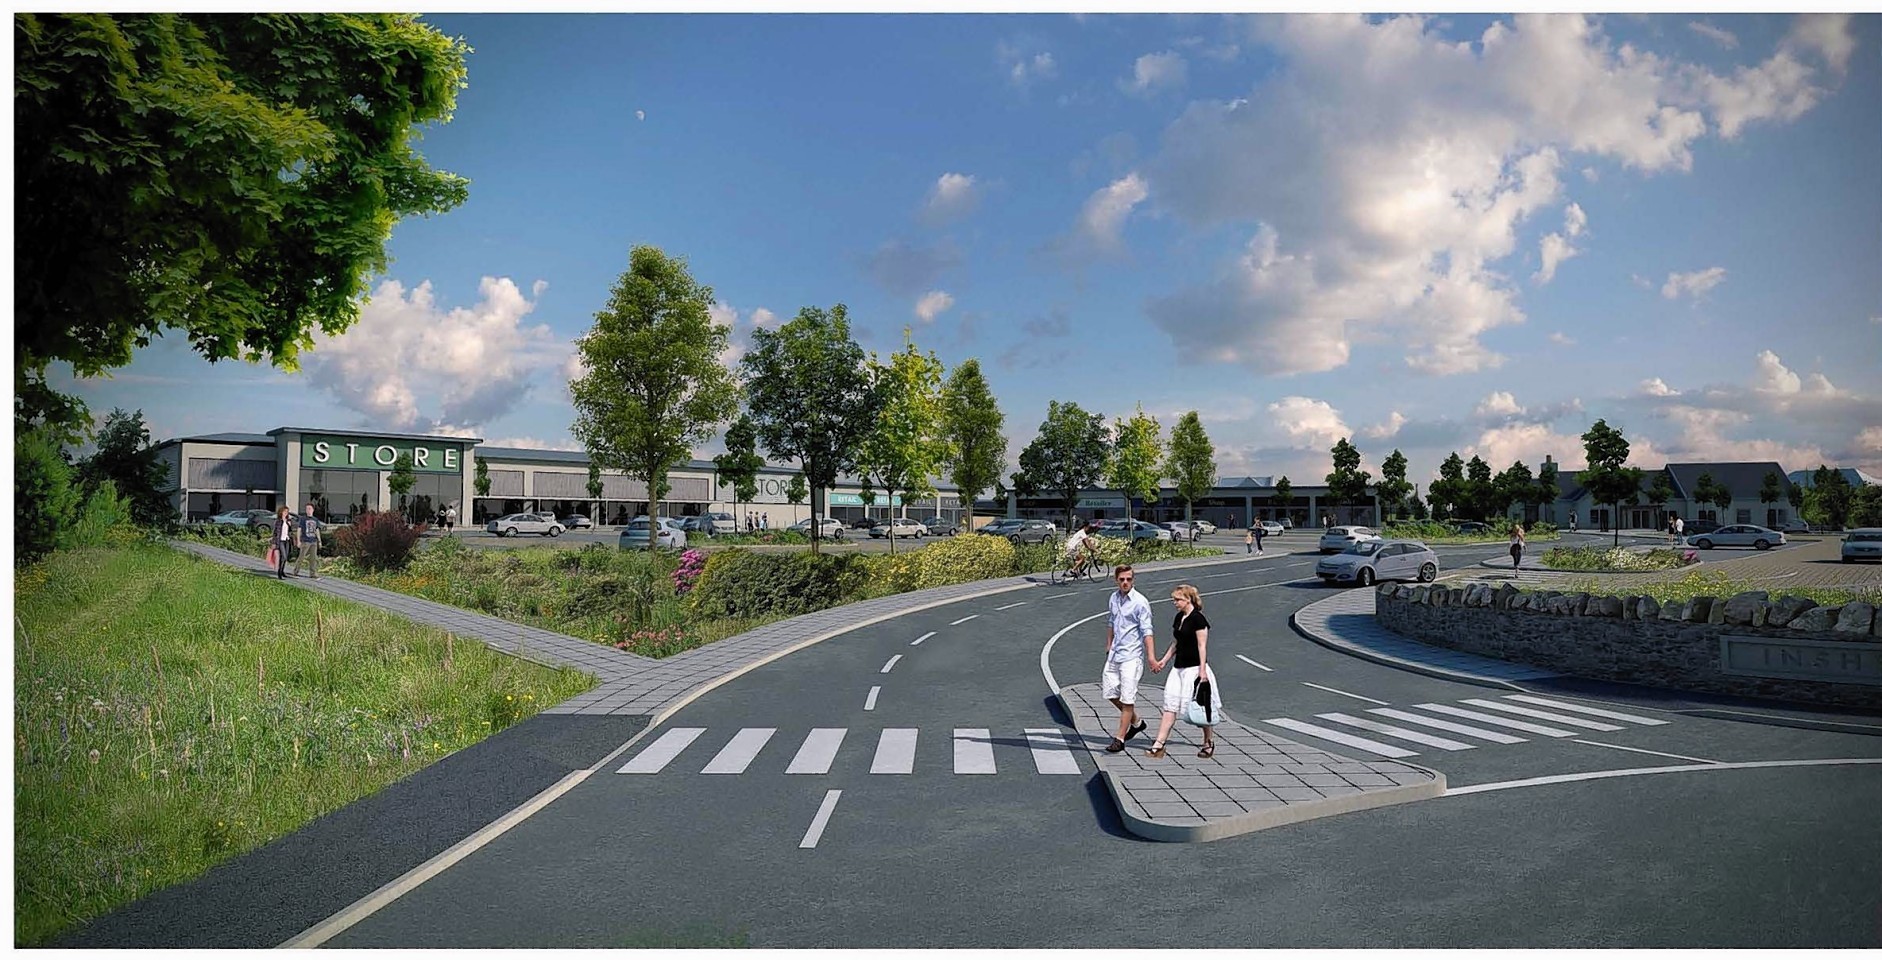 An artists impression of the proposed Dell of Inshes retail park